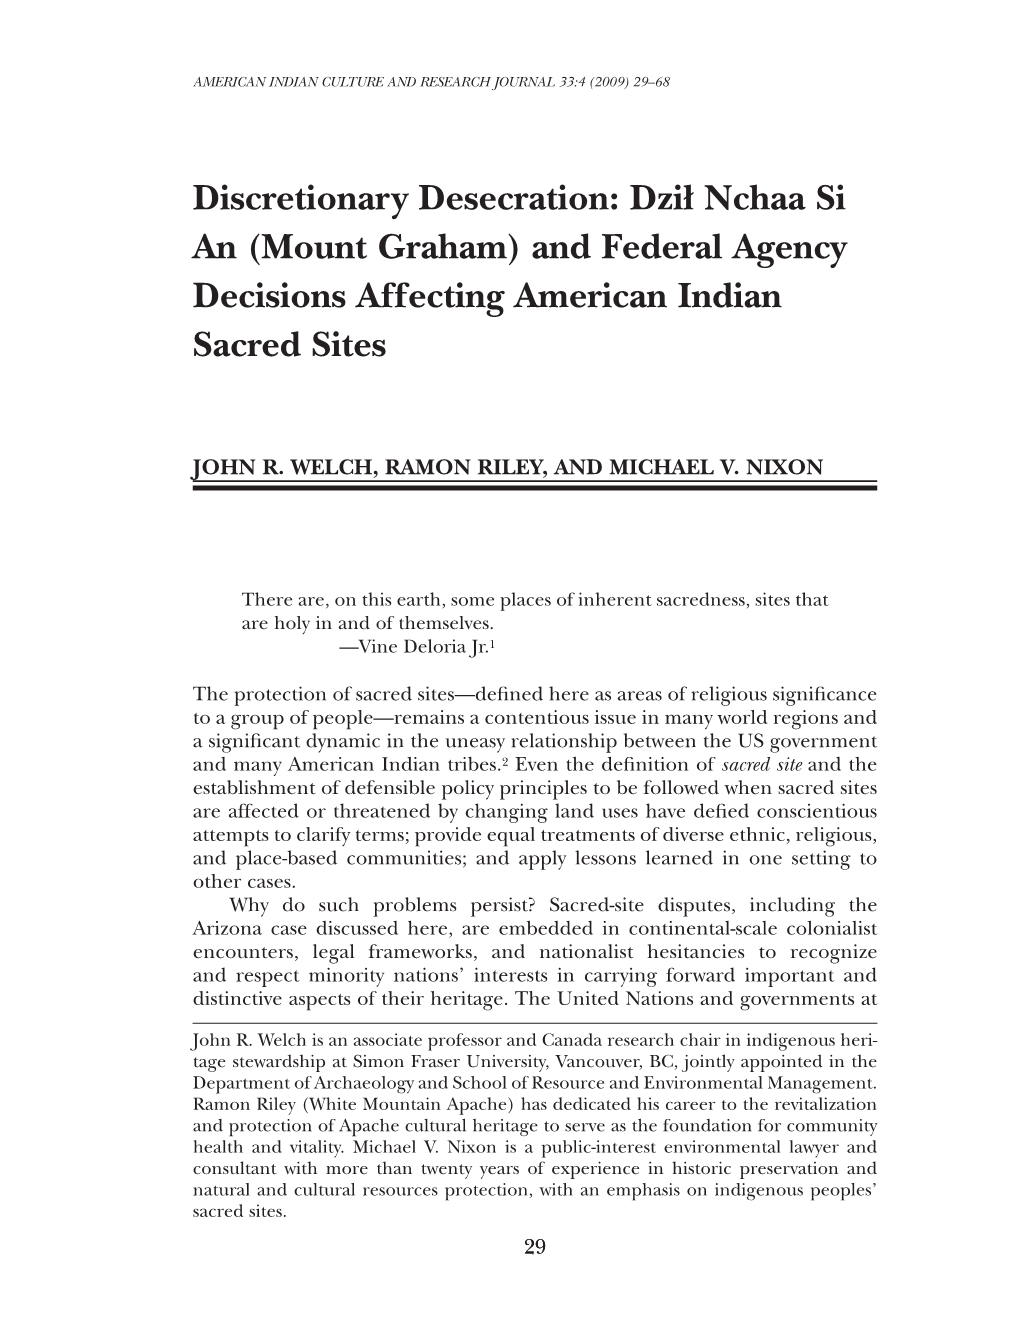 Dził Nchaa Si an (Mount Graham) and Federal Agency Decisions Affecting American Indian Sacred Sites